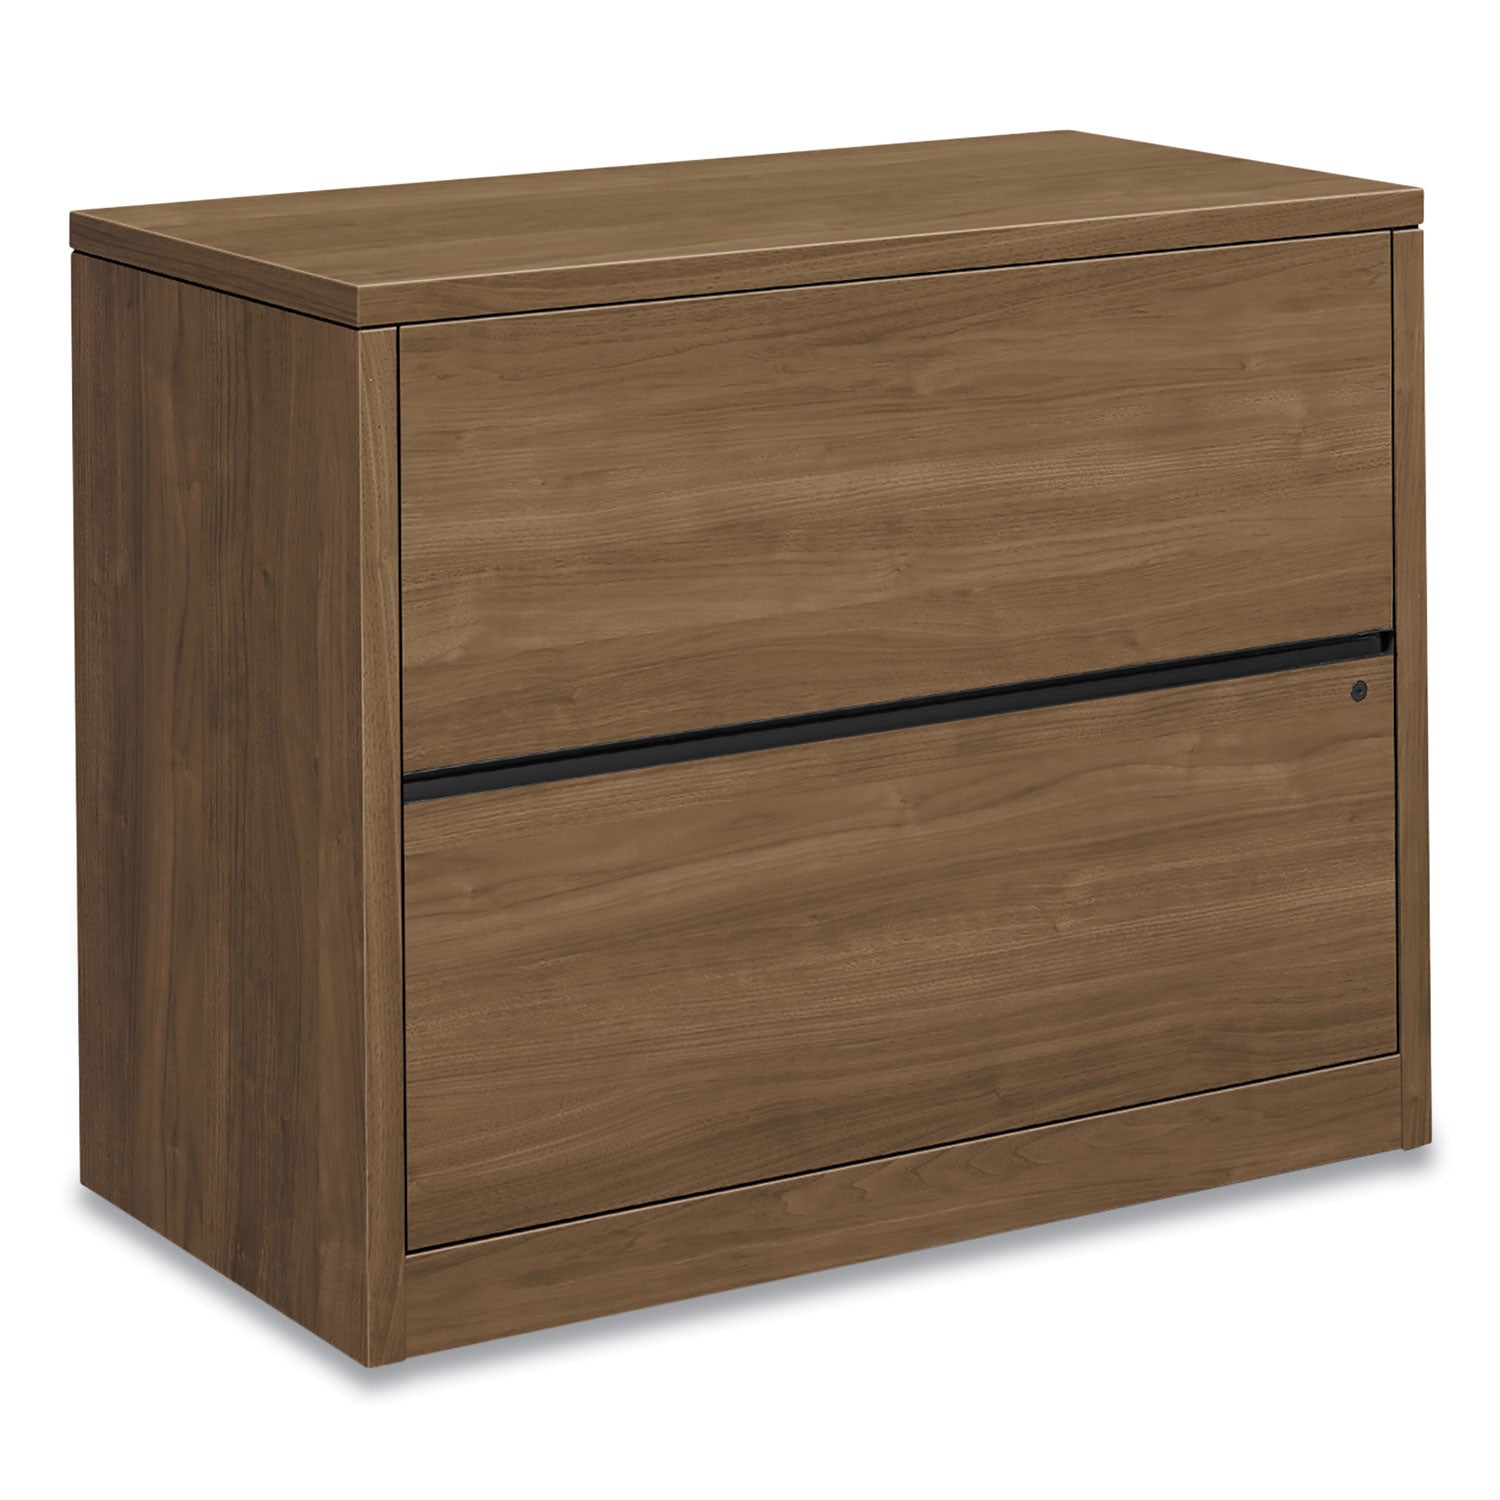 10500-series-lateral-file-2-legal-letter-size-file-drawers-pinnacle-36-x-20-x-295_hon10563pinc - 1